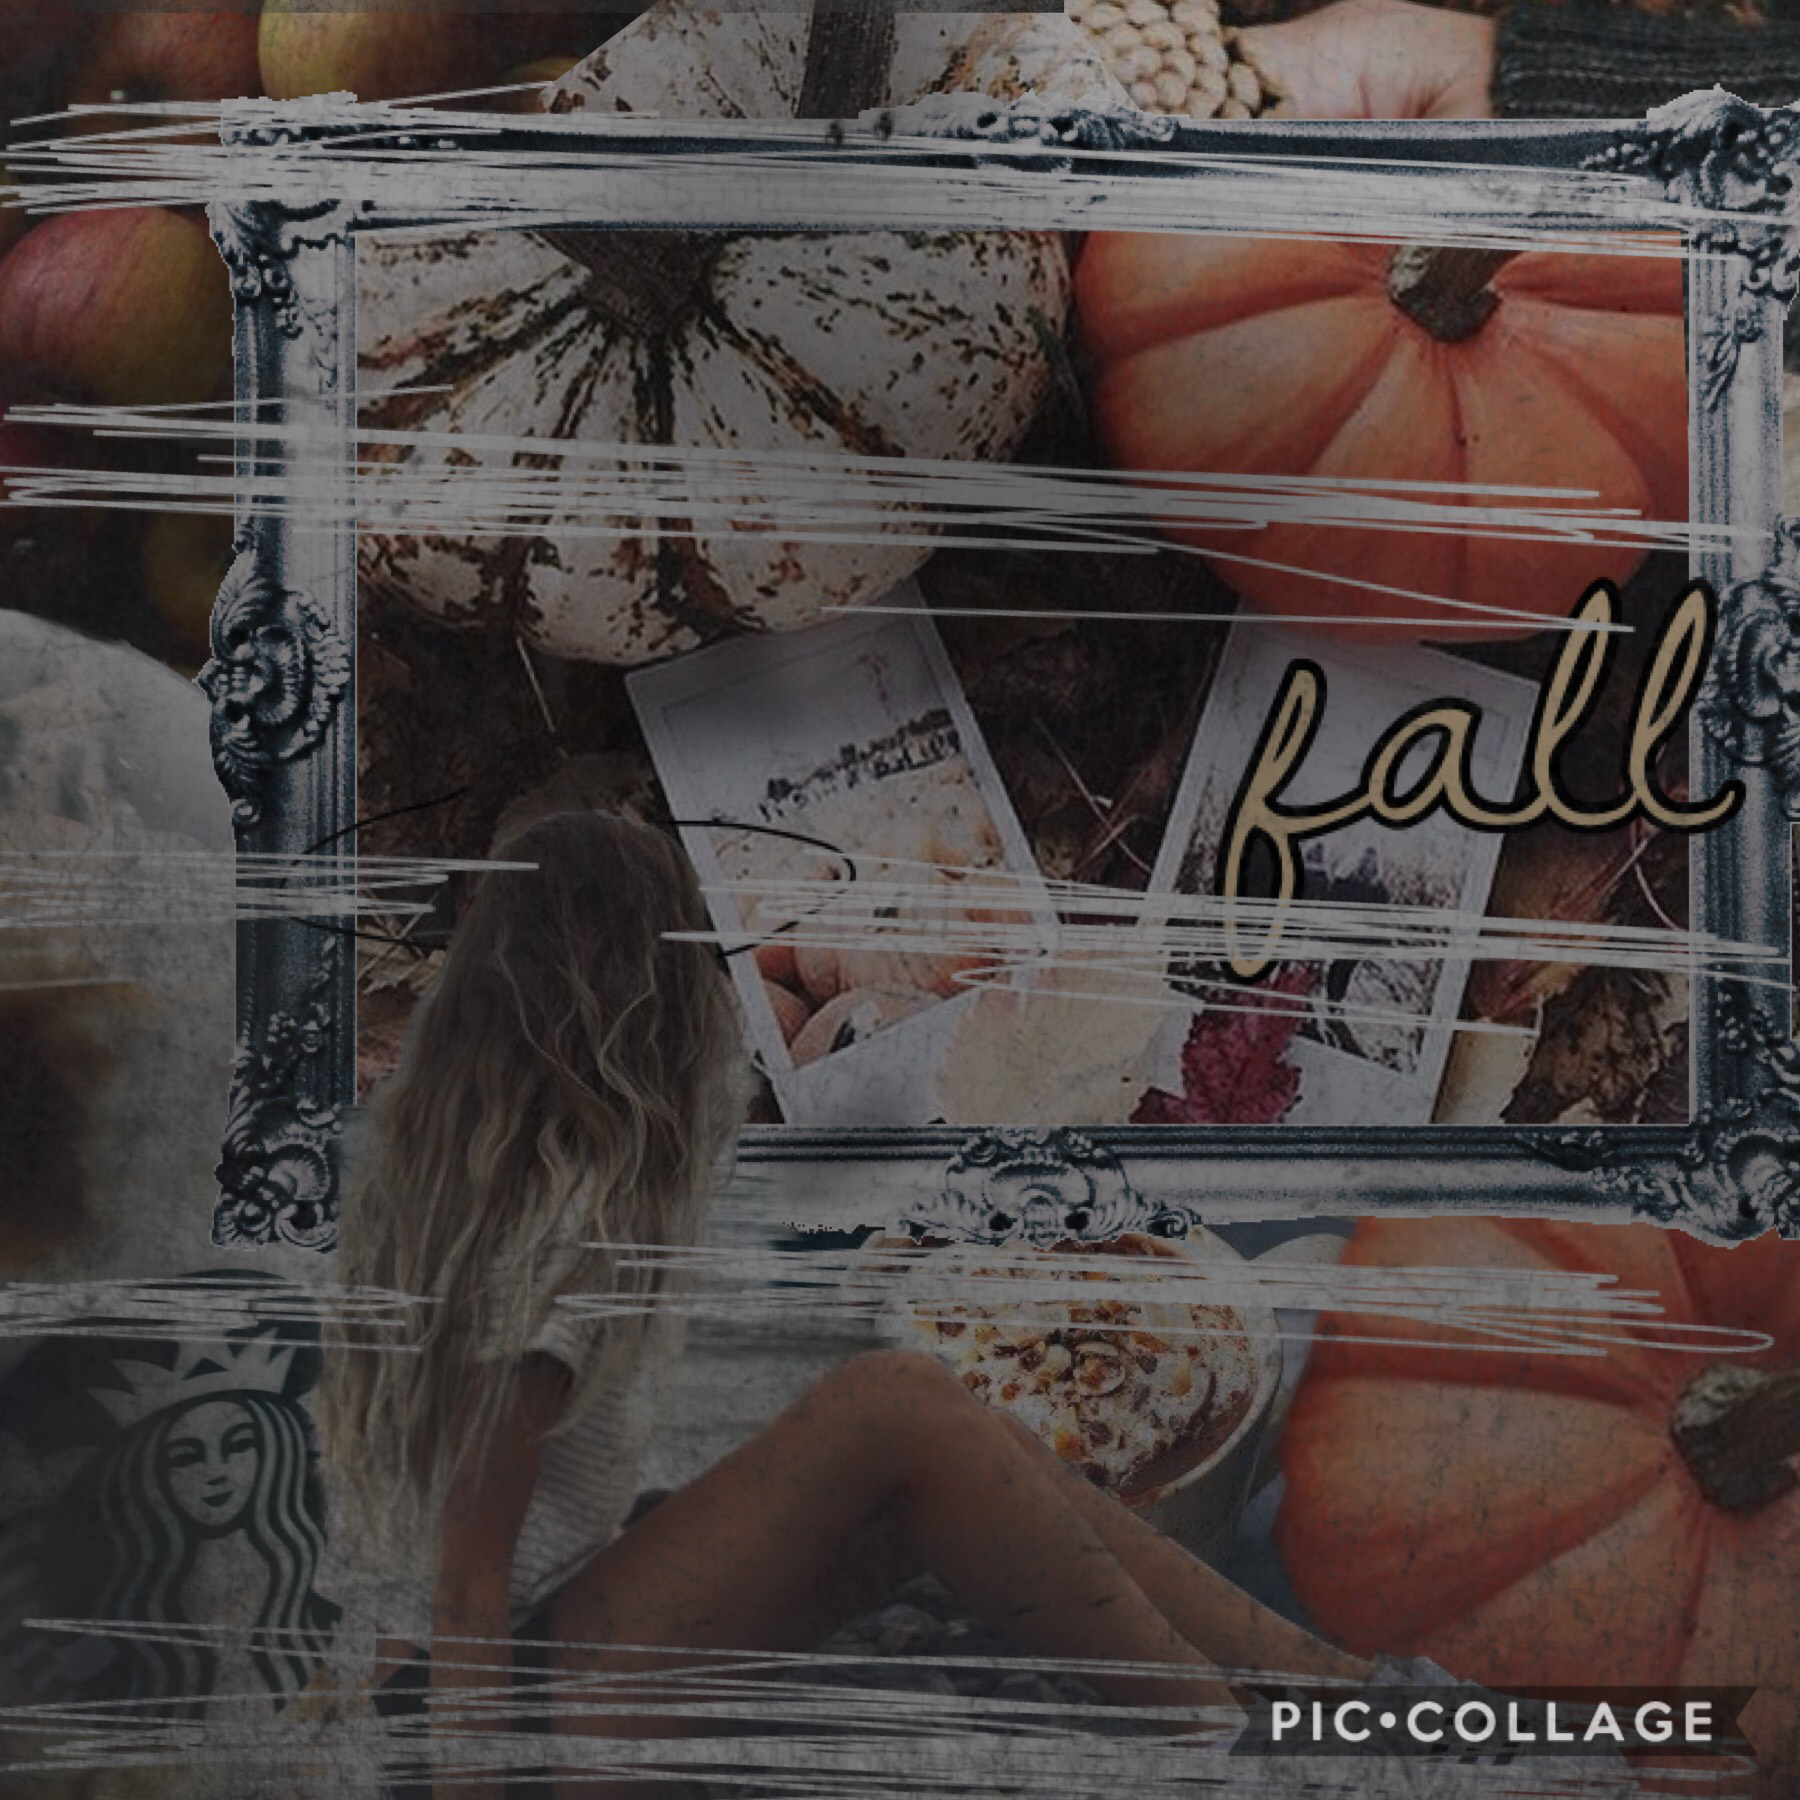 -TAP-
Okay
So it’s almost autumn my second favorite season.
Swim Team Starts soon 
Oh and one of the photos in this collage is one that took so try to guess it?
Qotd-Summers or Autumn 
Aotd- Autumn (besides school starting)